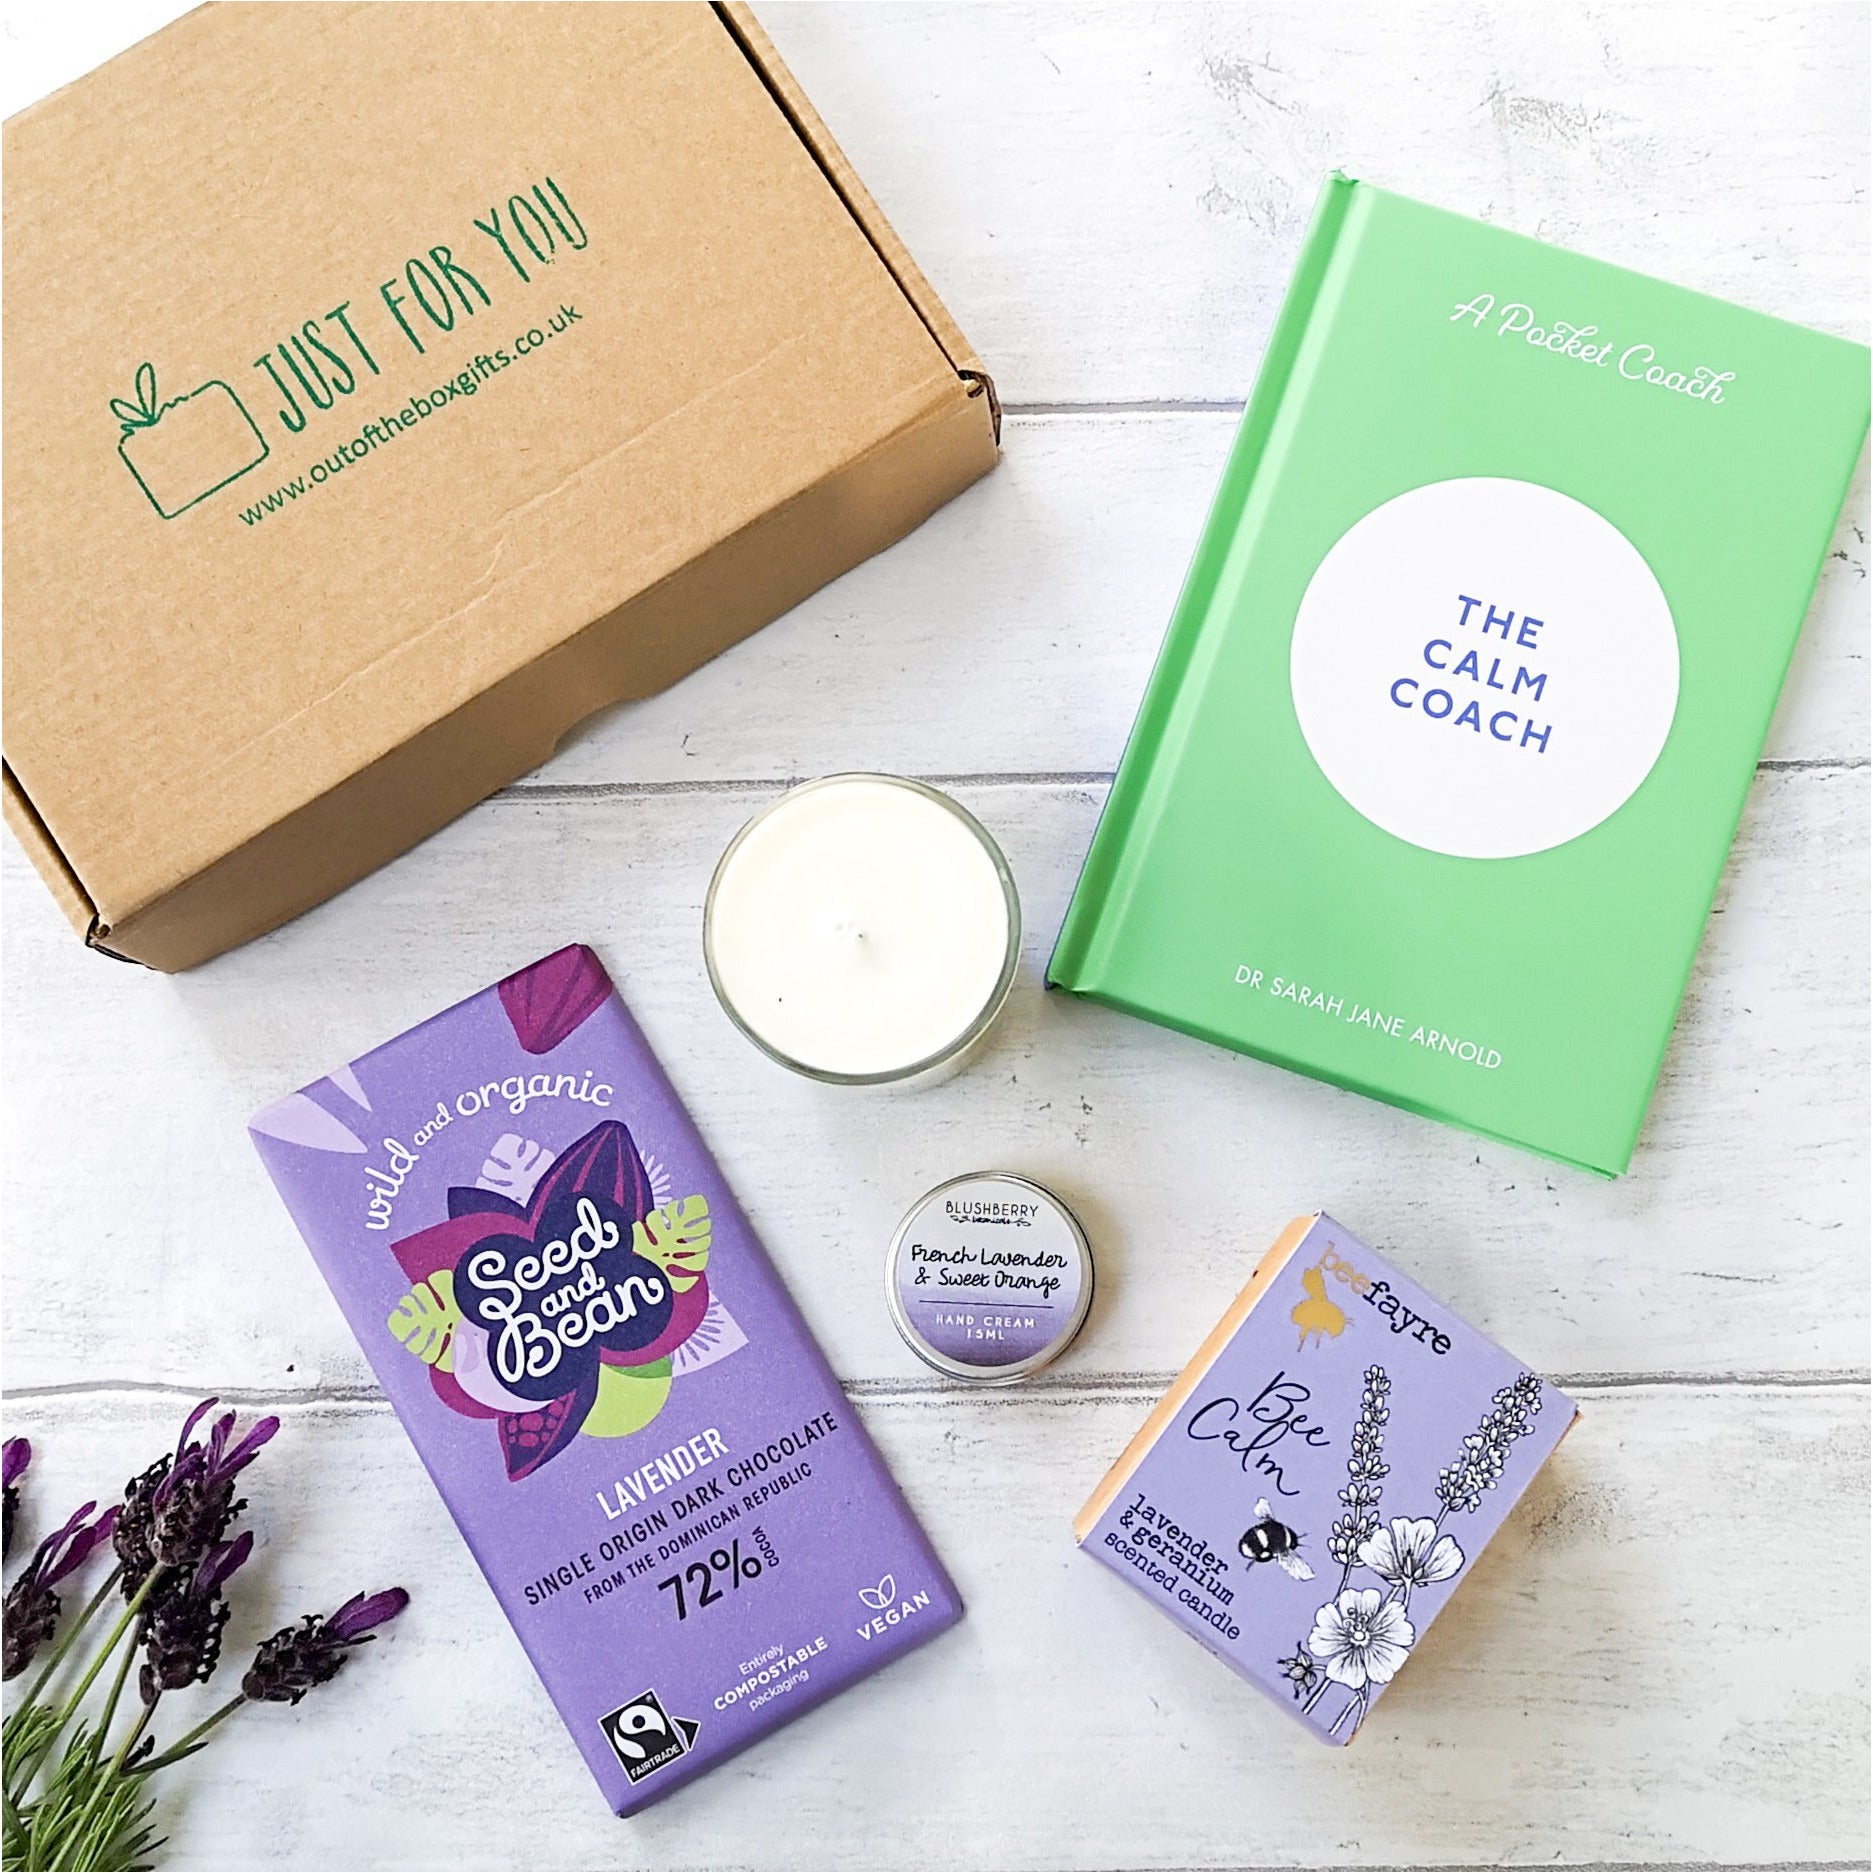 Vegan Calming Gift - buy from Out of the Box Gifts